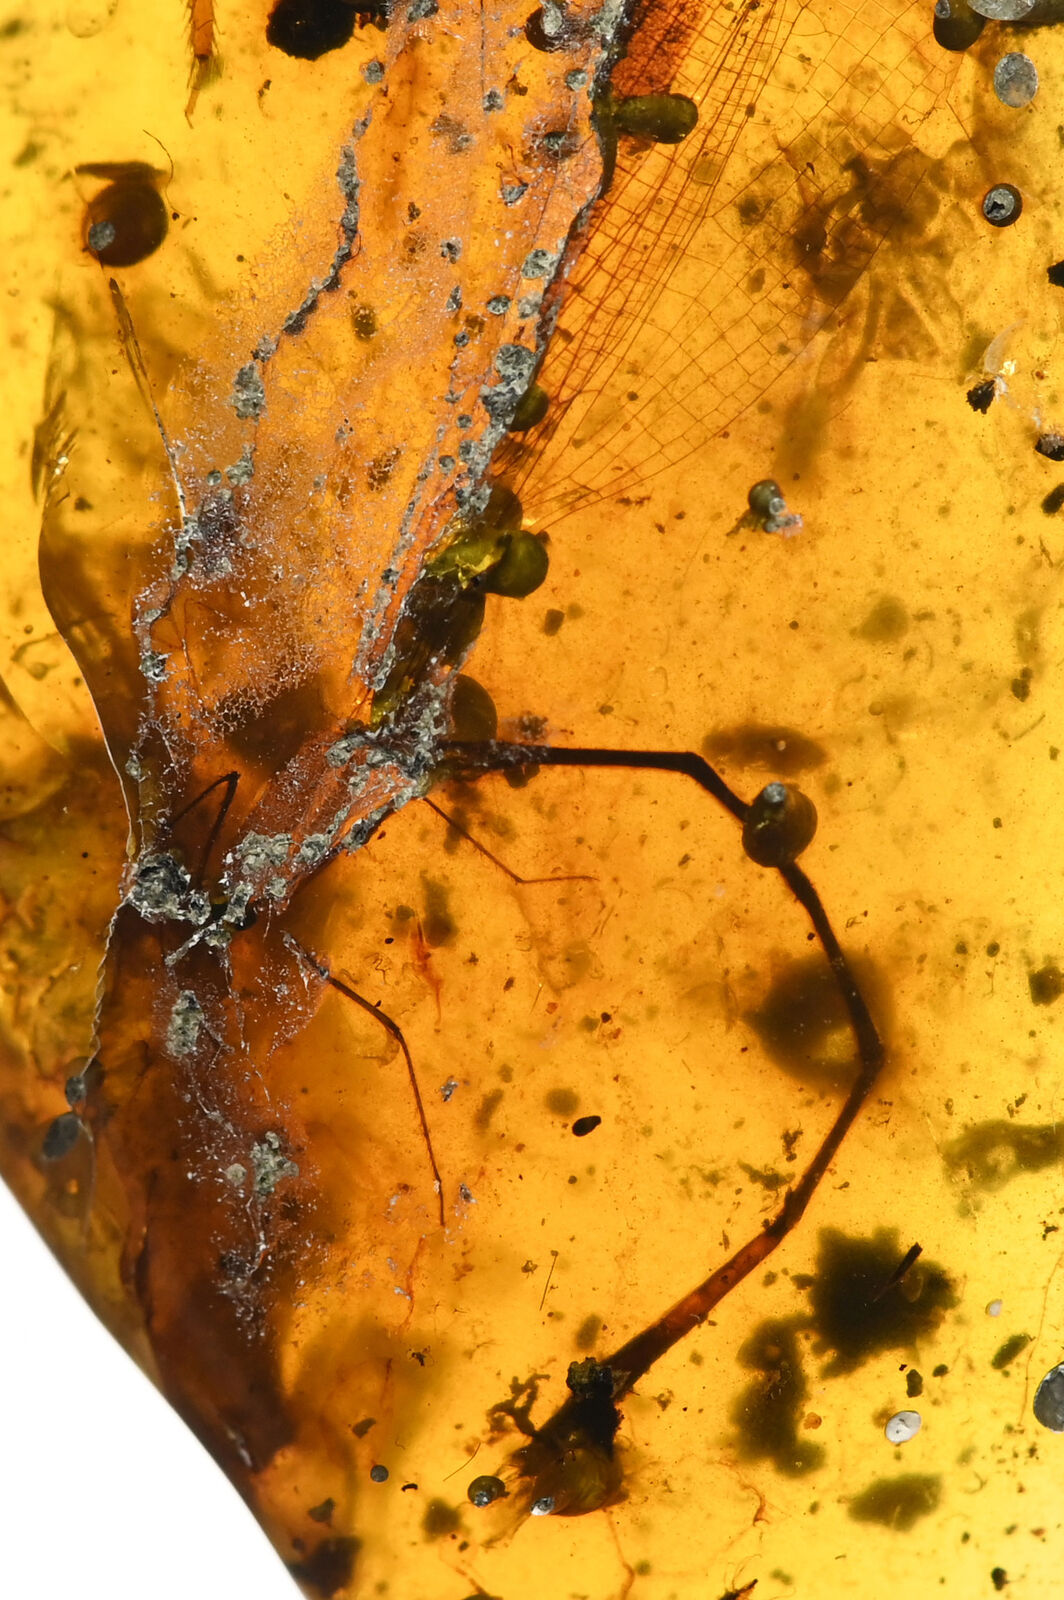 RARE Large Zygoptera (Damselfly), Fossil inclusion in Burmese Amber